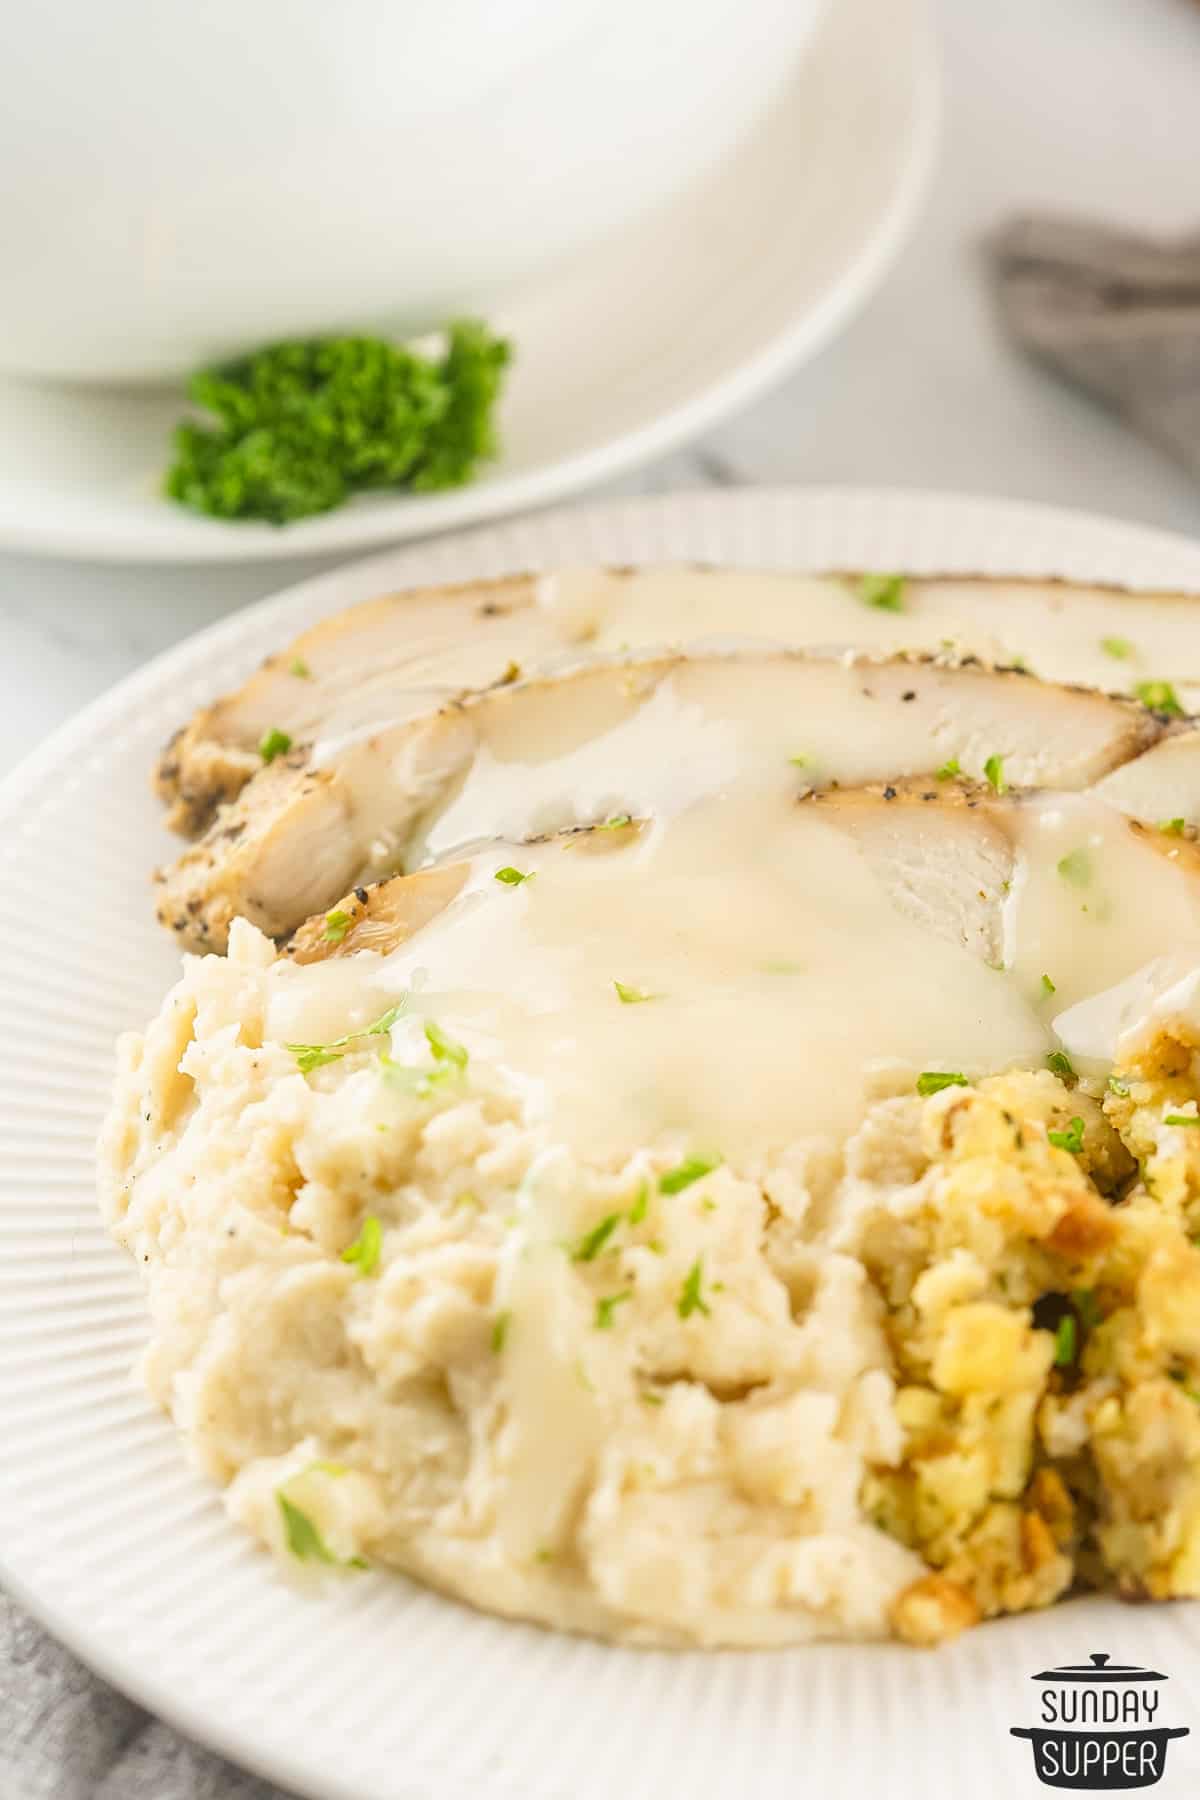 turkey gravy poured over turkey breast, stuffing, and mashed potatoes on a plate